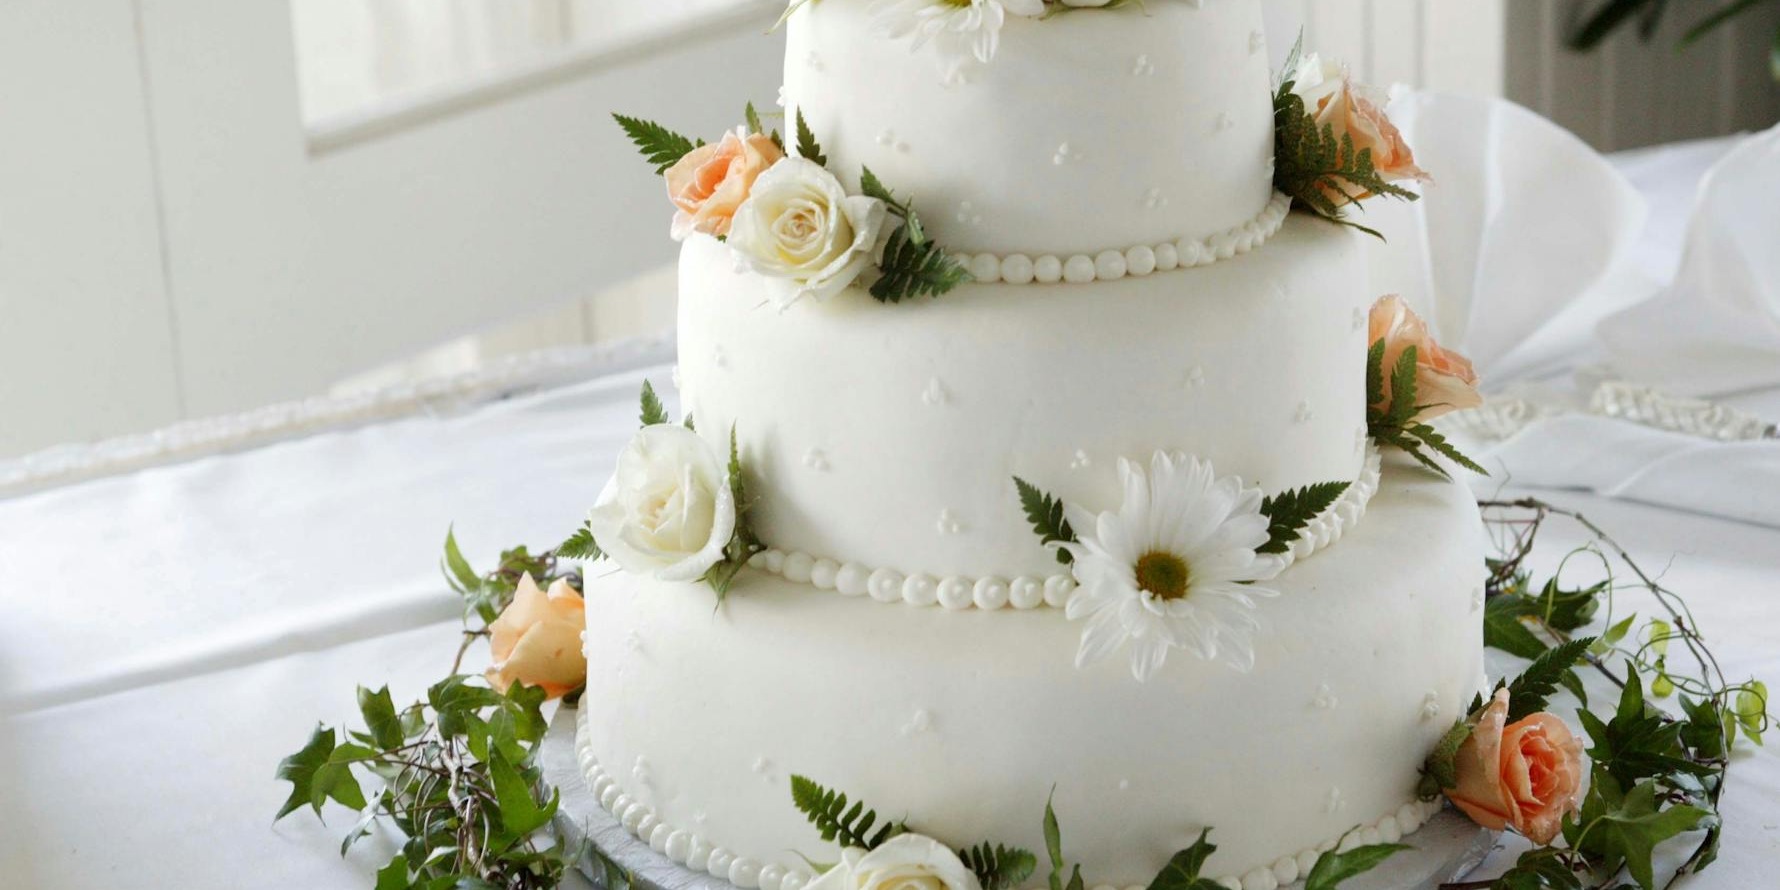 Top 5 Wedding Cake Flavours Loved by Brides in Manchester